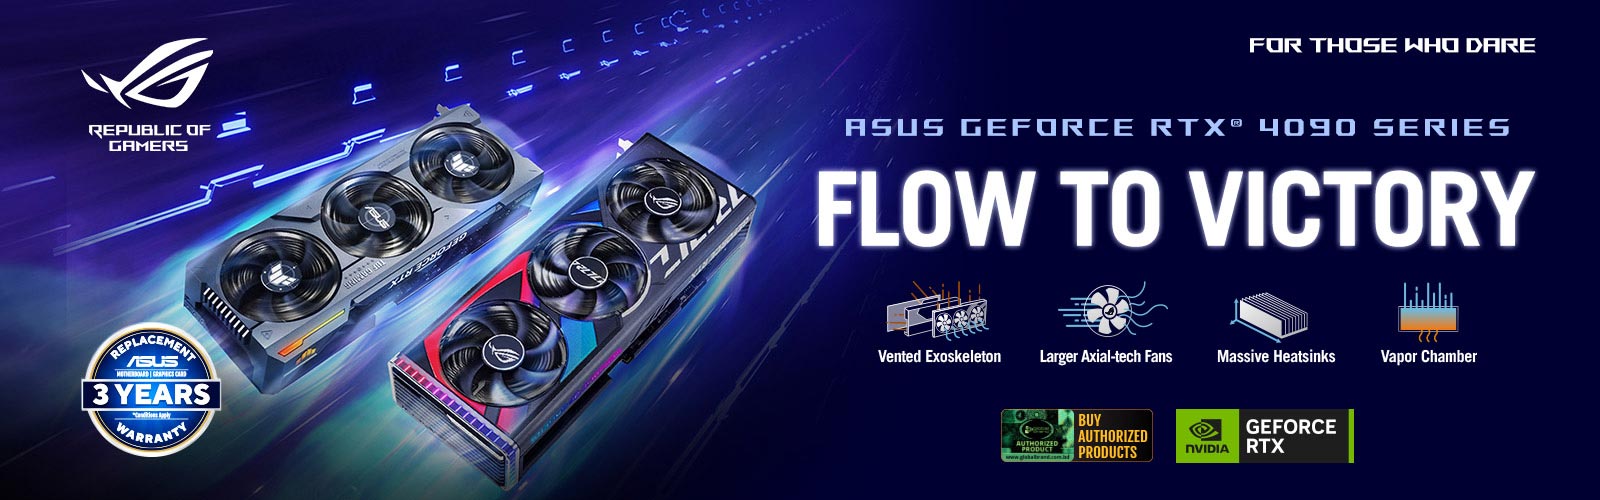 Asus Graphics card in BD